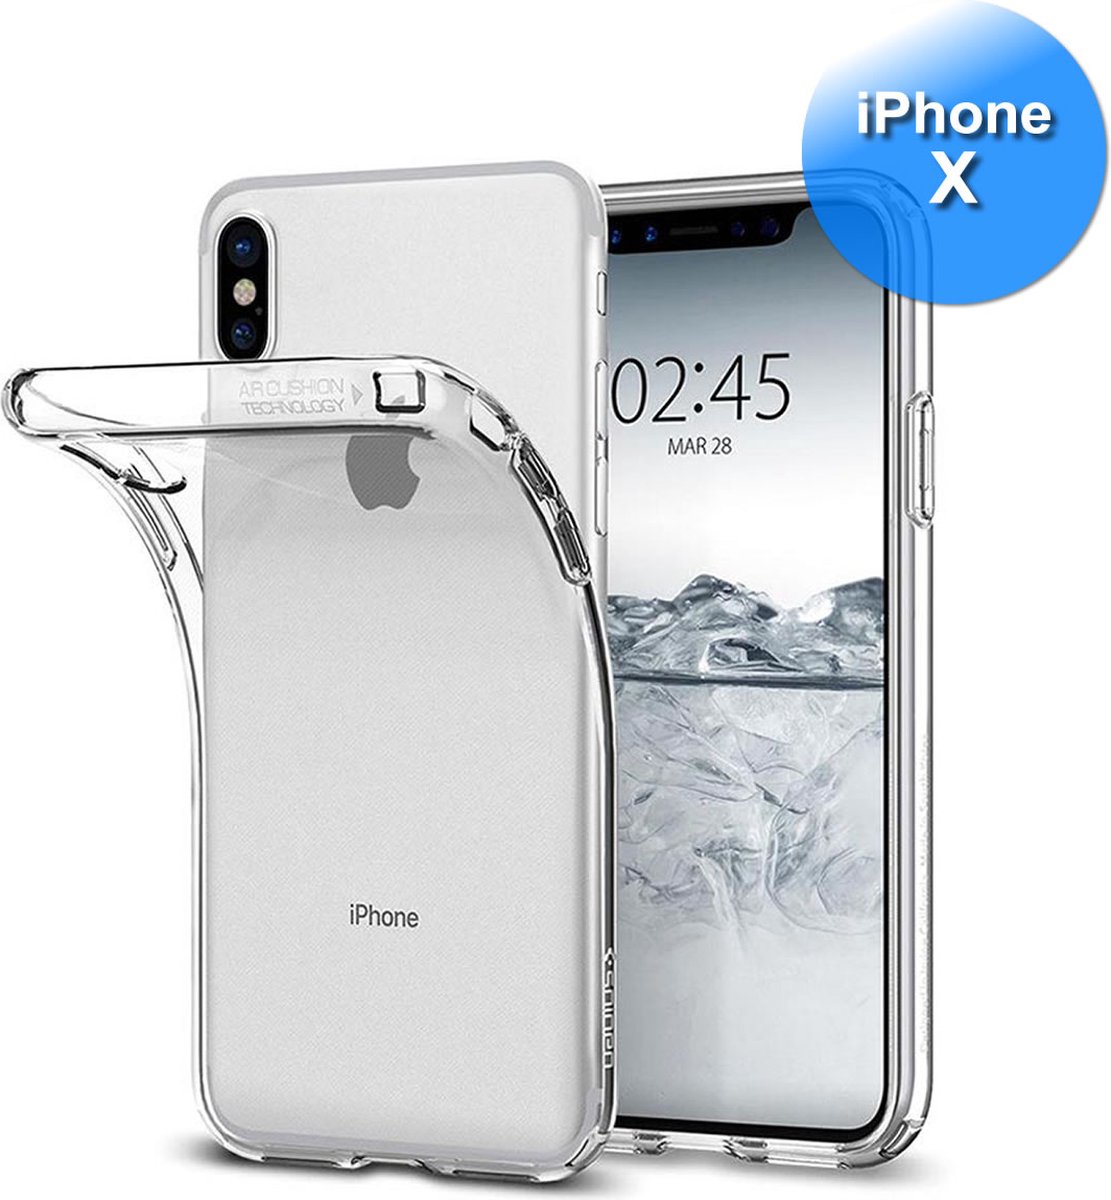 Hoesje geschikt voor iPhone X/10 - 5.8 inch - Transparant Siliconen - Back Cover - Transparant